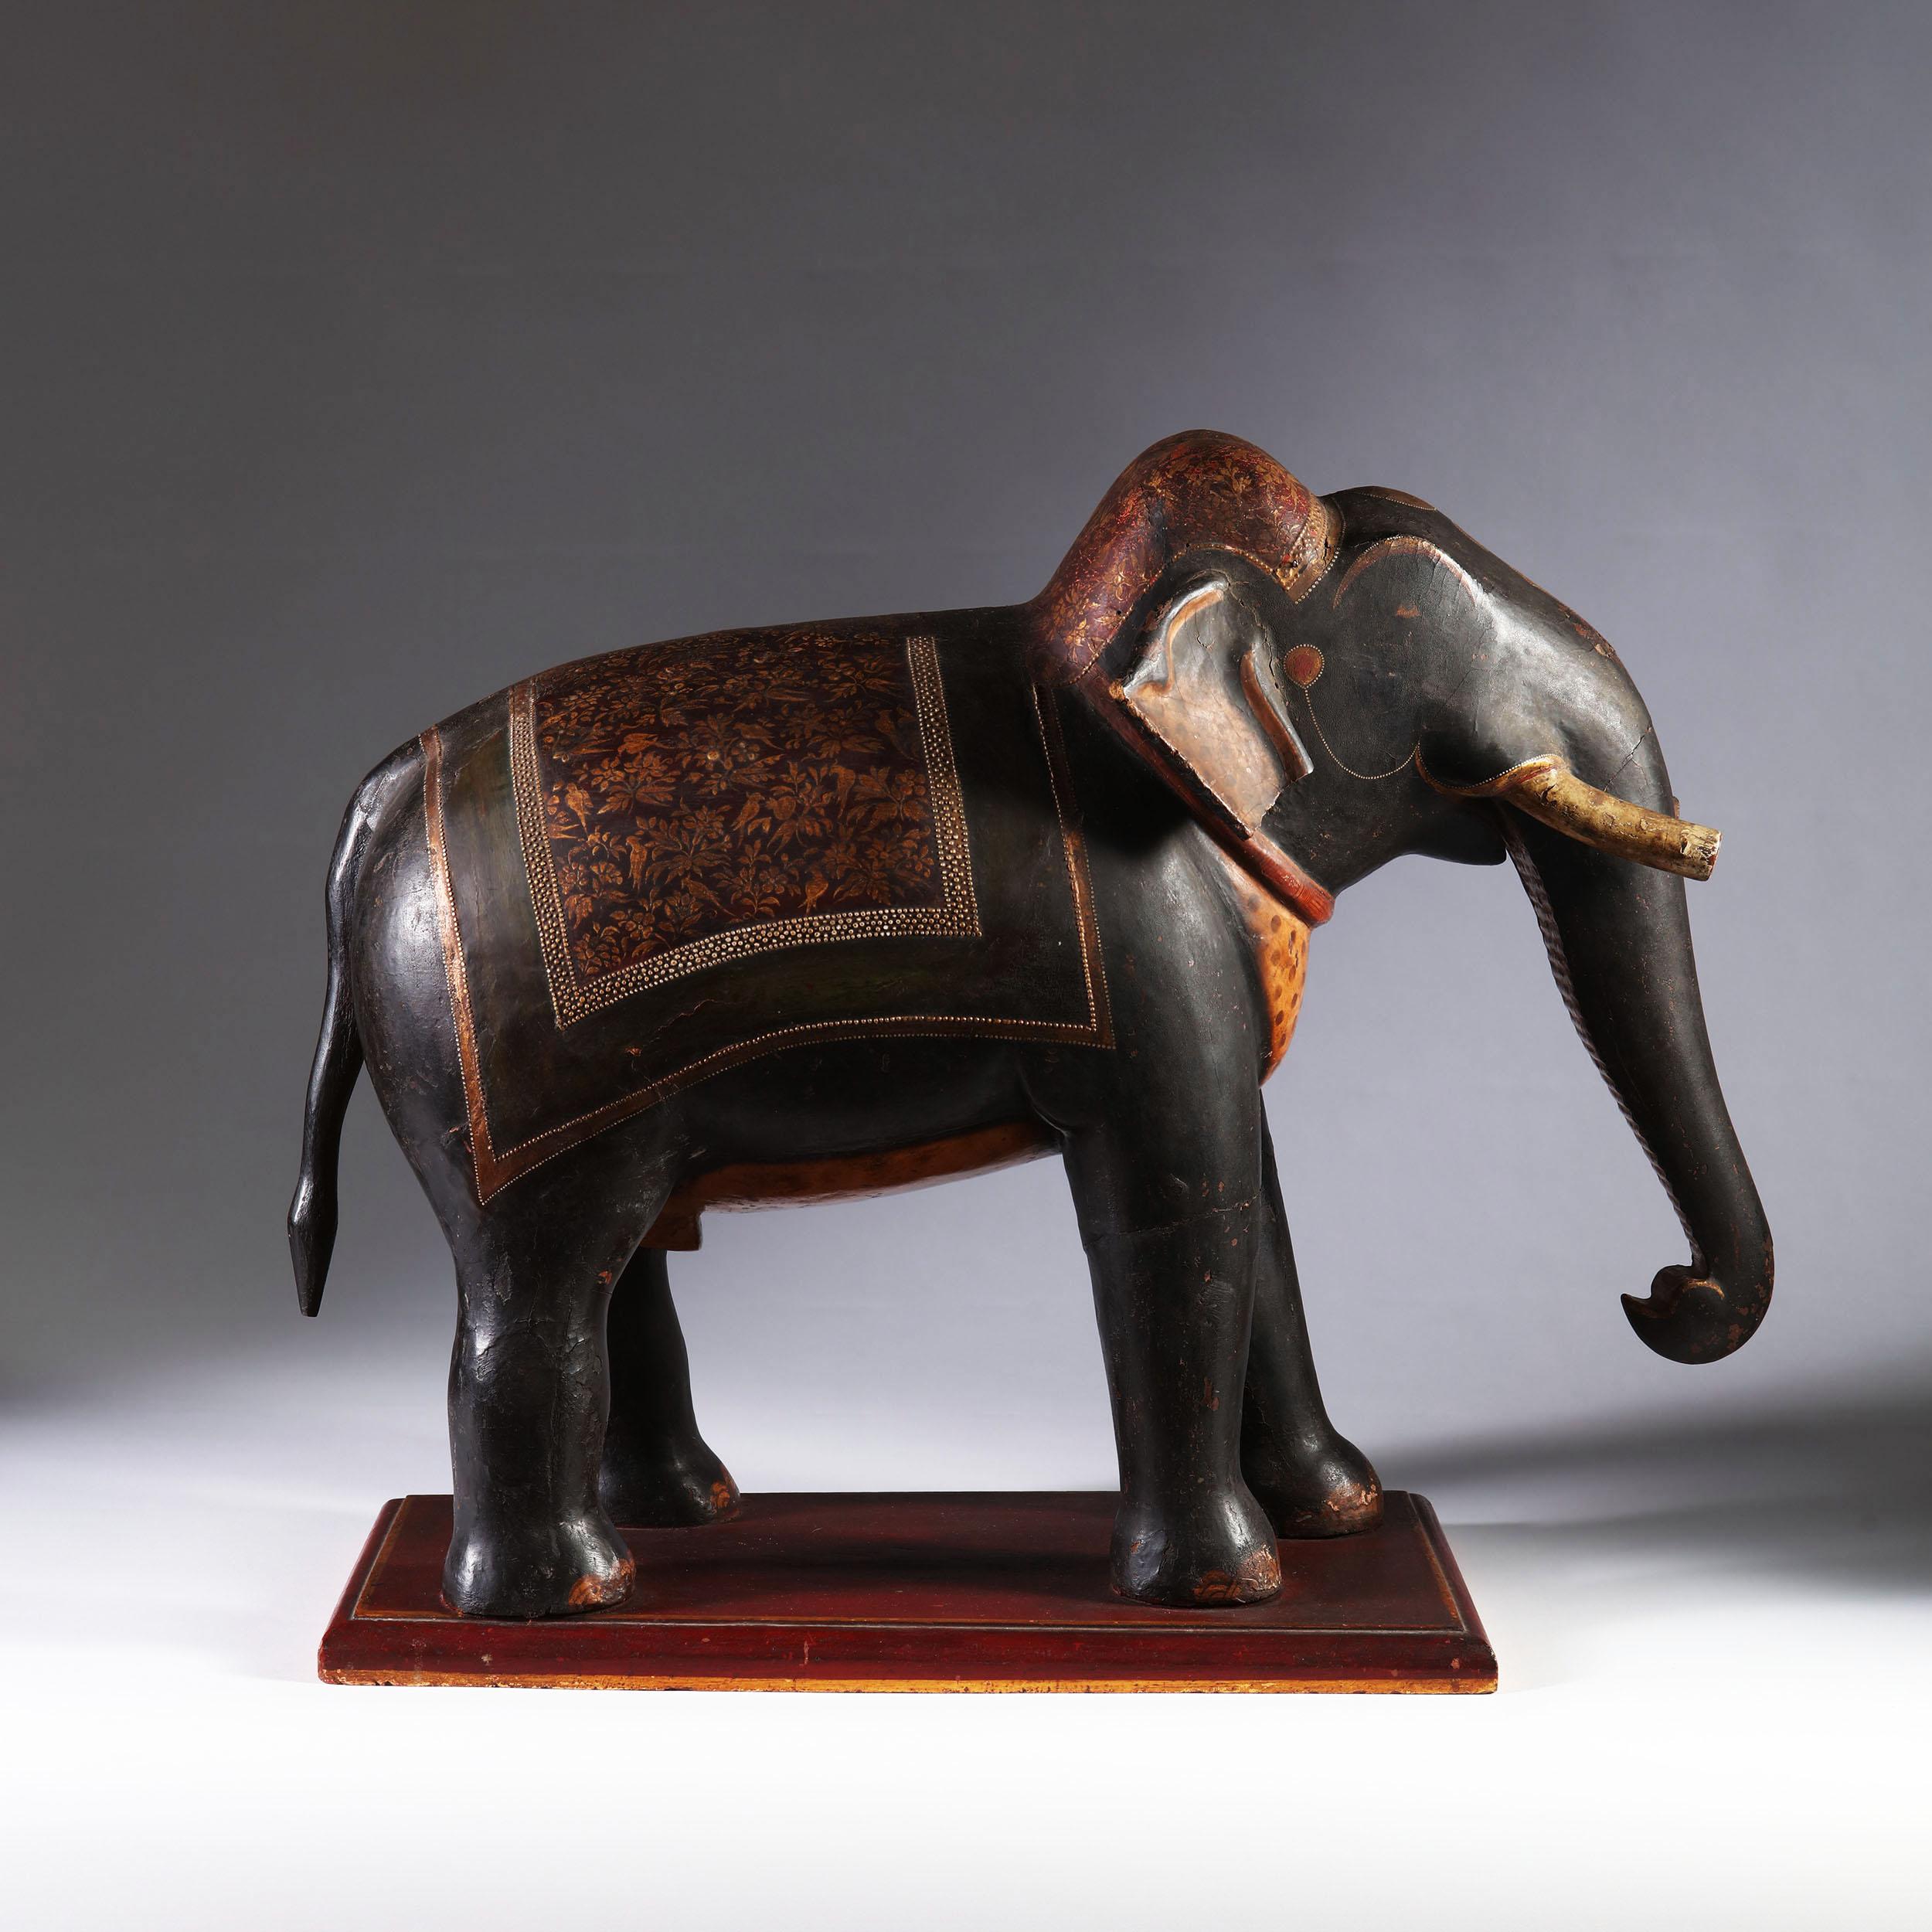 20th Century Large Indian Polychrome Carved Wooden Elephant